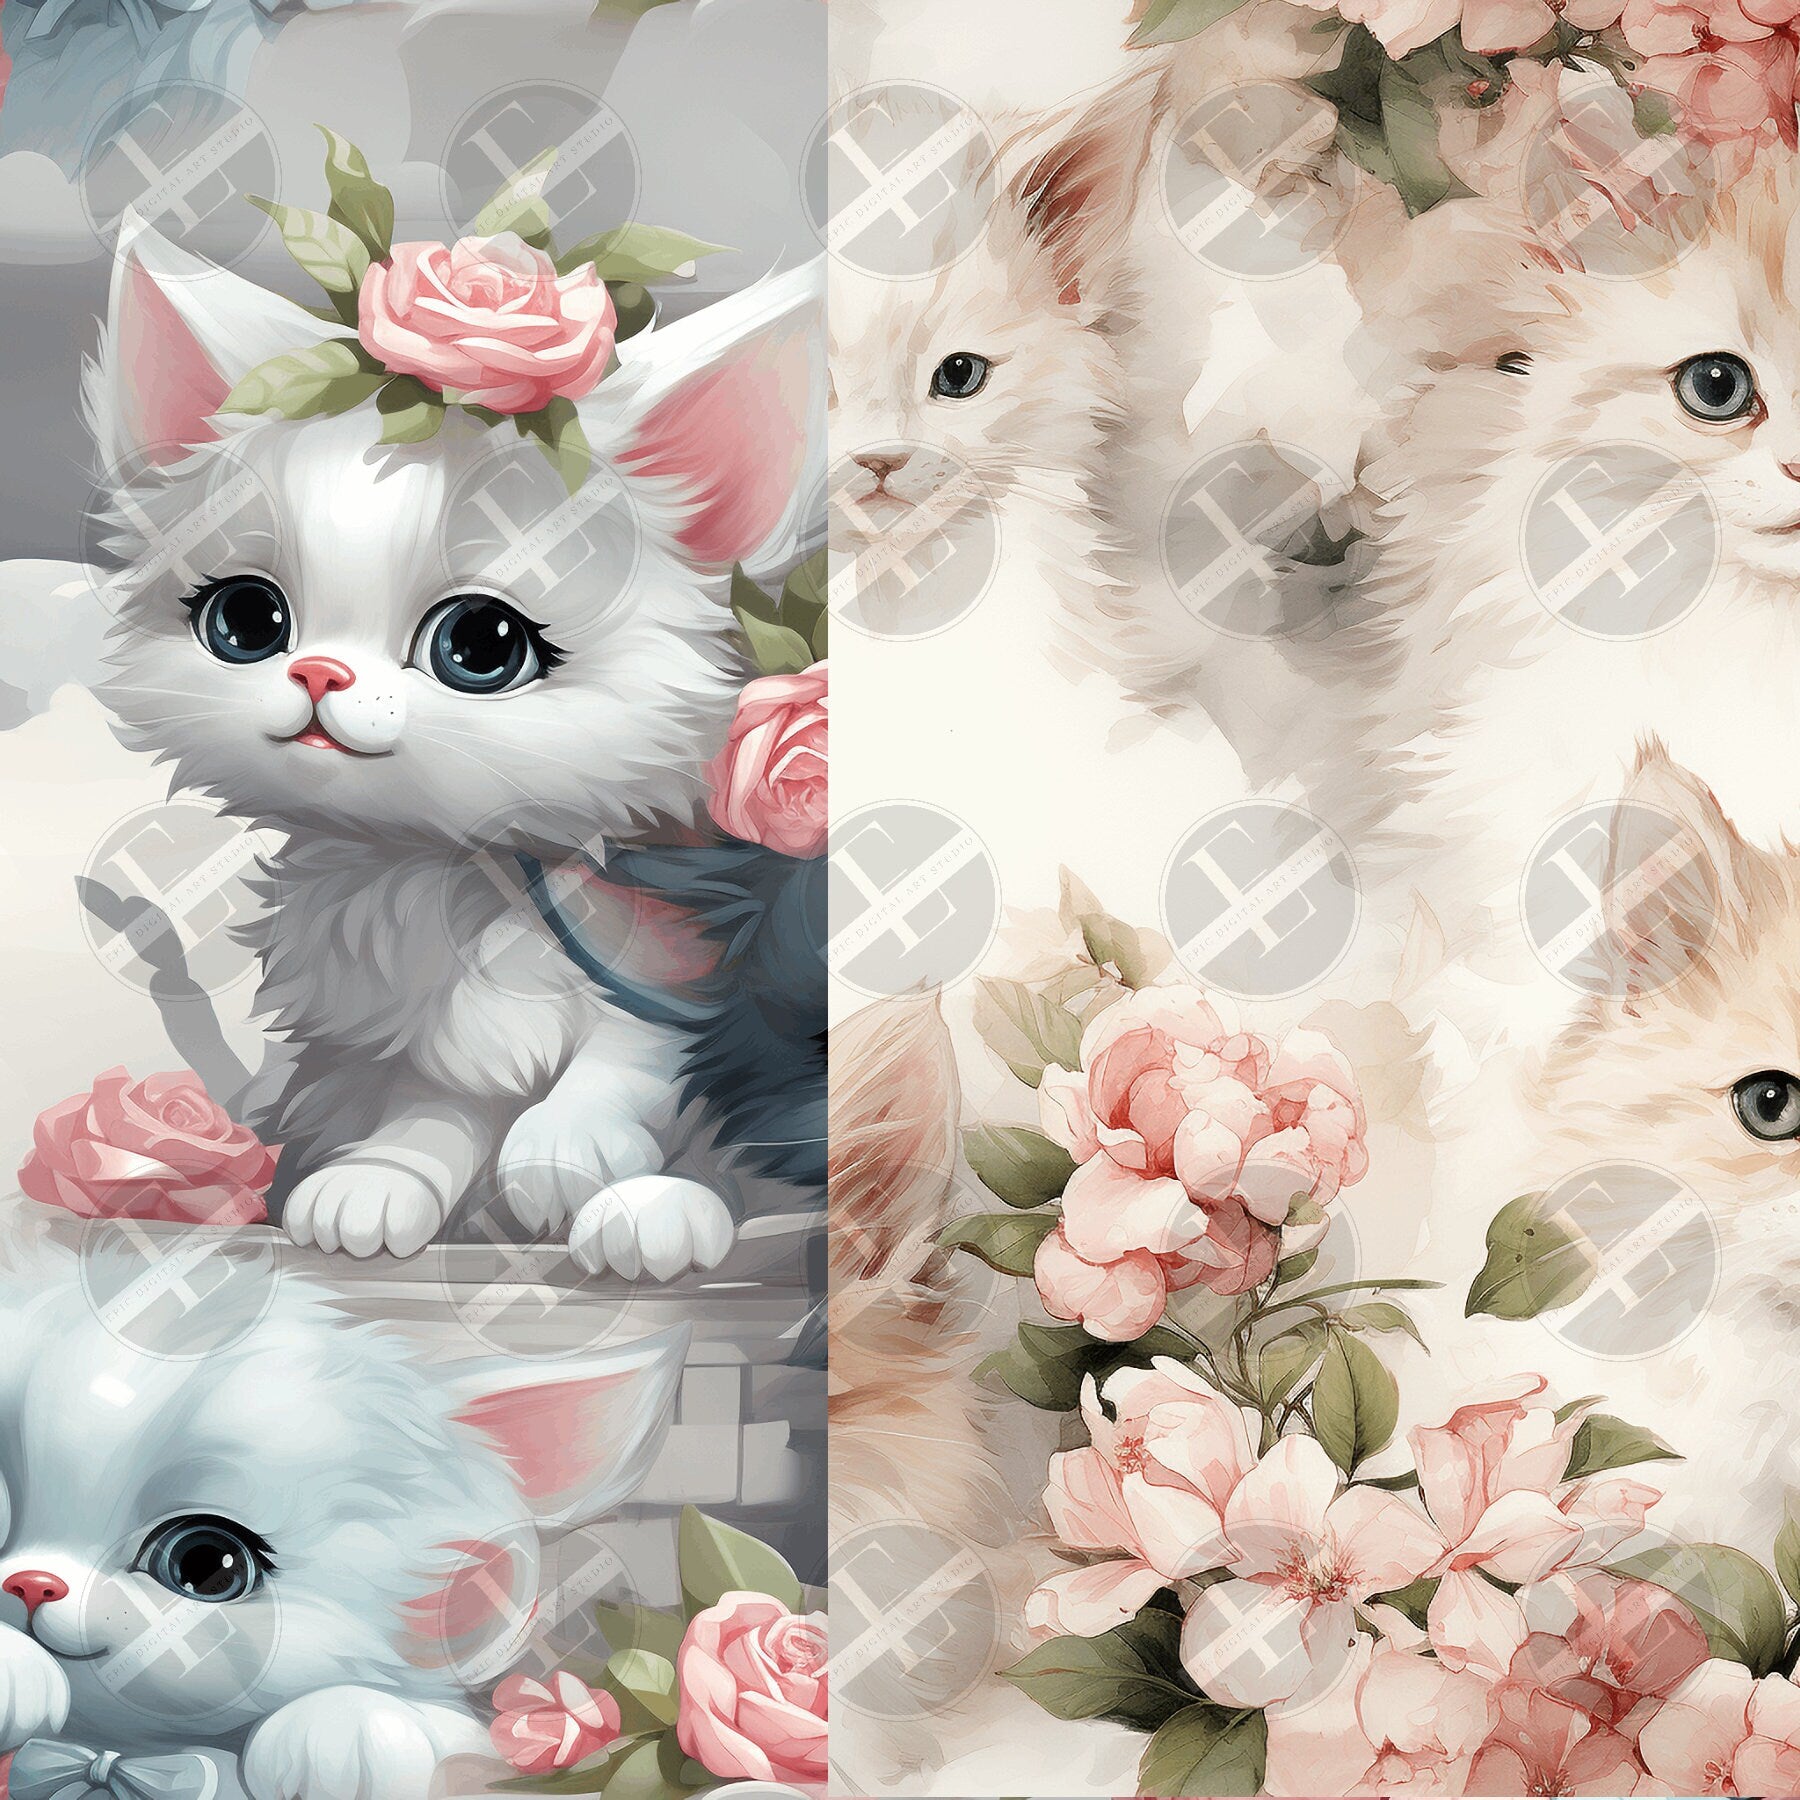 Cute Cat Seamless Patterns Digital Download PNG - Bundle of 16 - Shabby Chic Soft Watercolor Kittens Patterns - Commercial & Personal Use